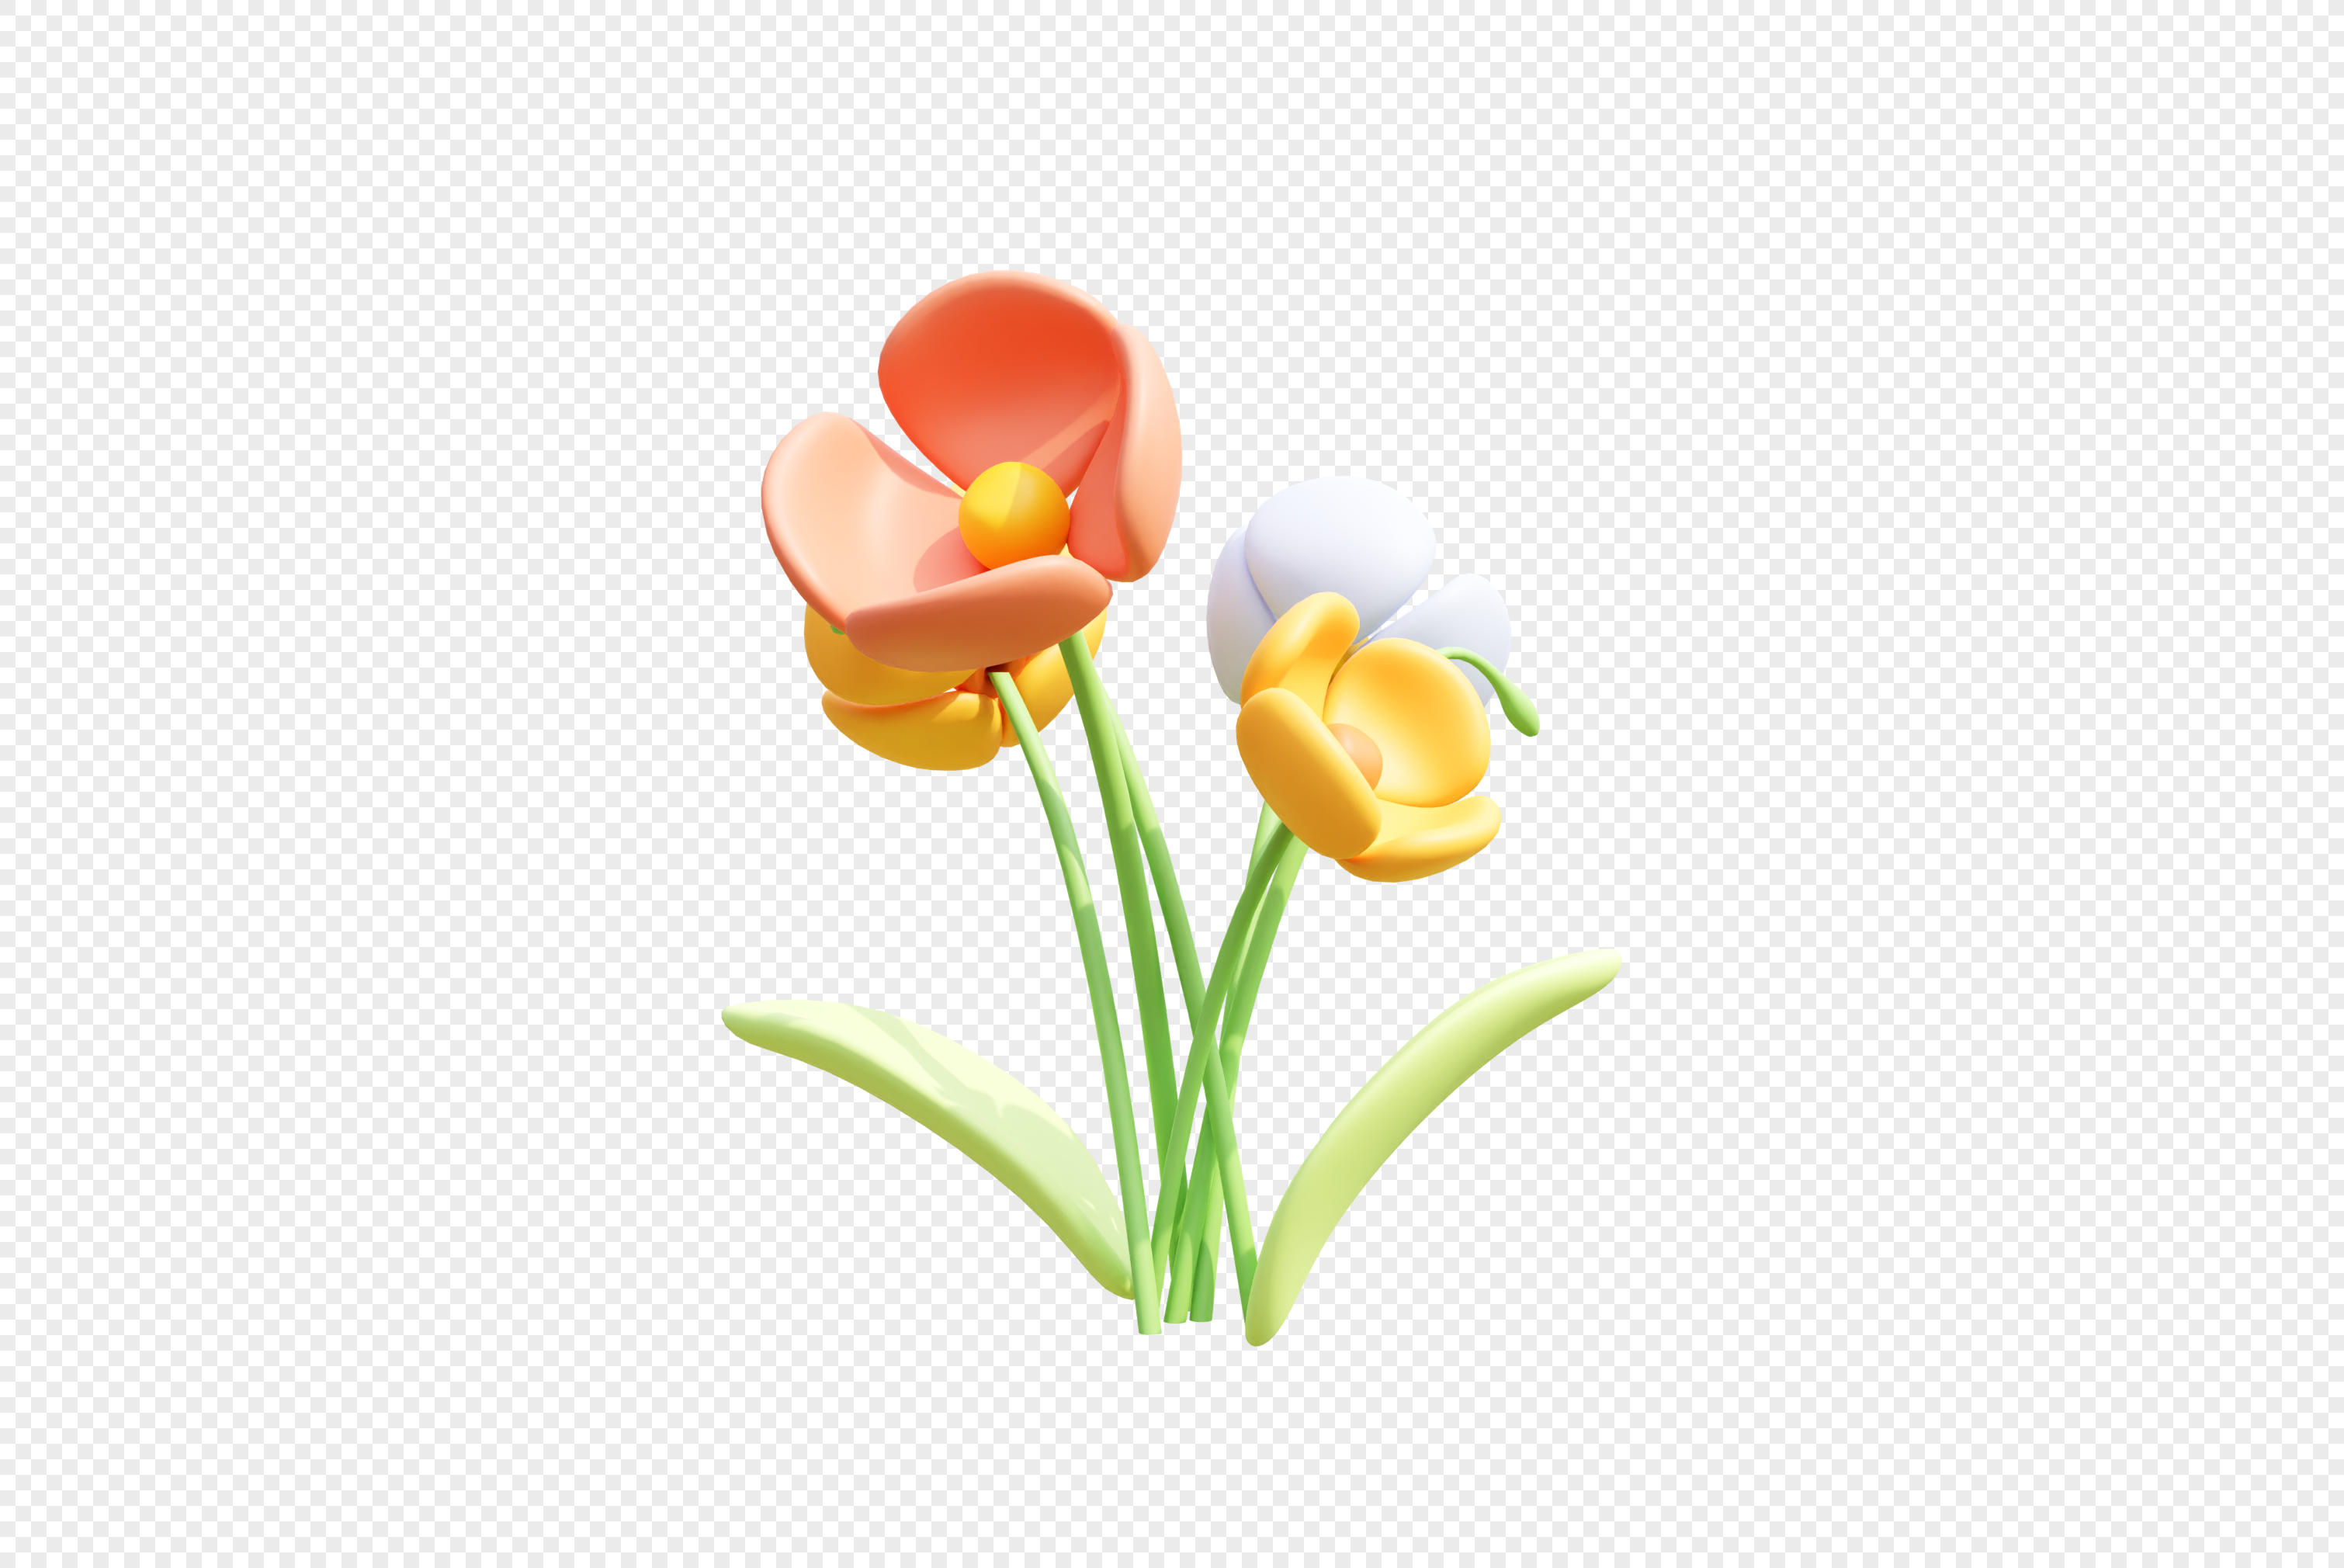 3d Flower Images, HD Pictures For Free Vectors Download 